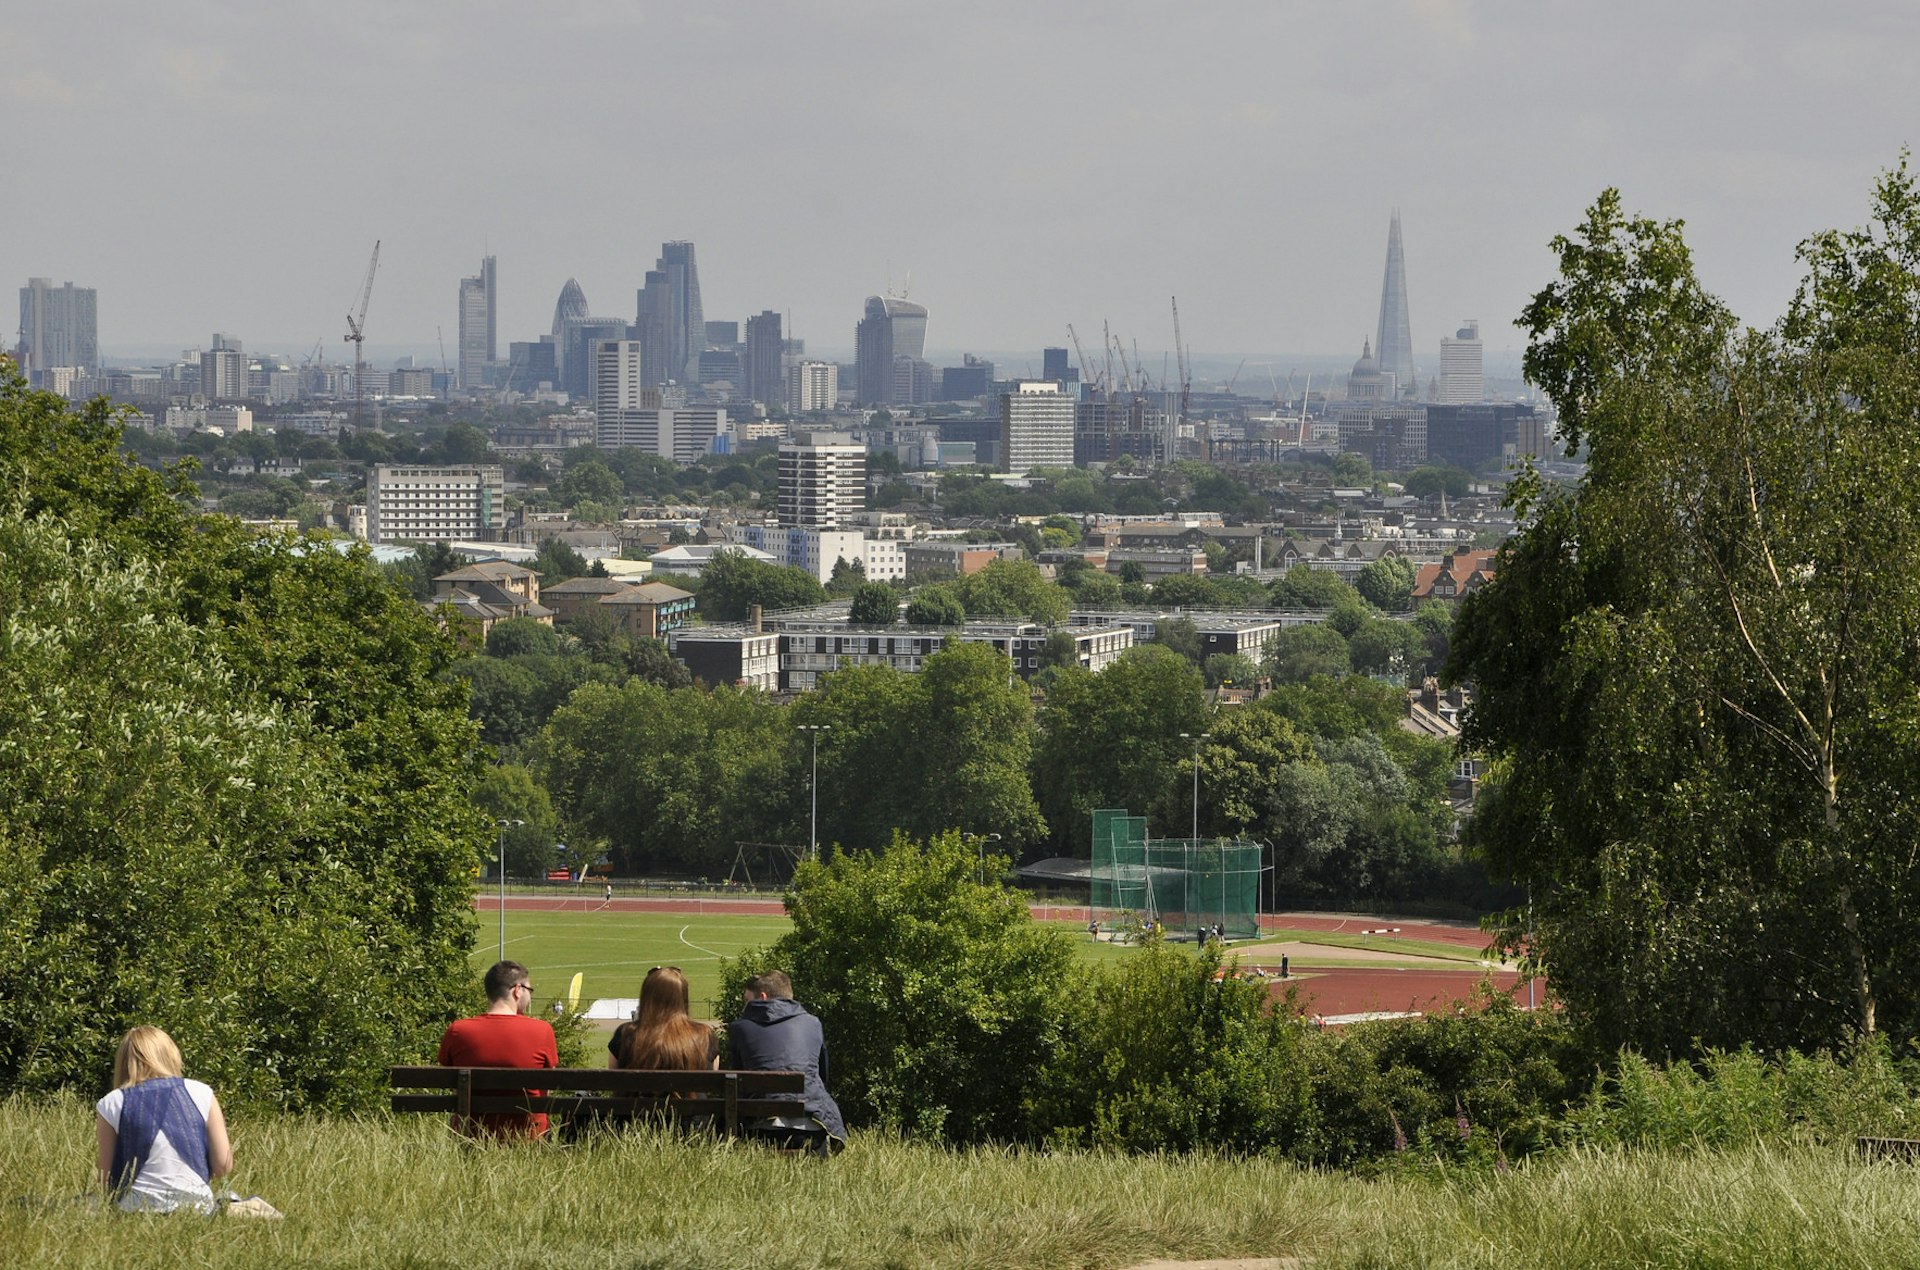 Parliament Hill on Hampstead Heath. Image by Francisco Antunes / CC BY 2.0